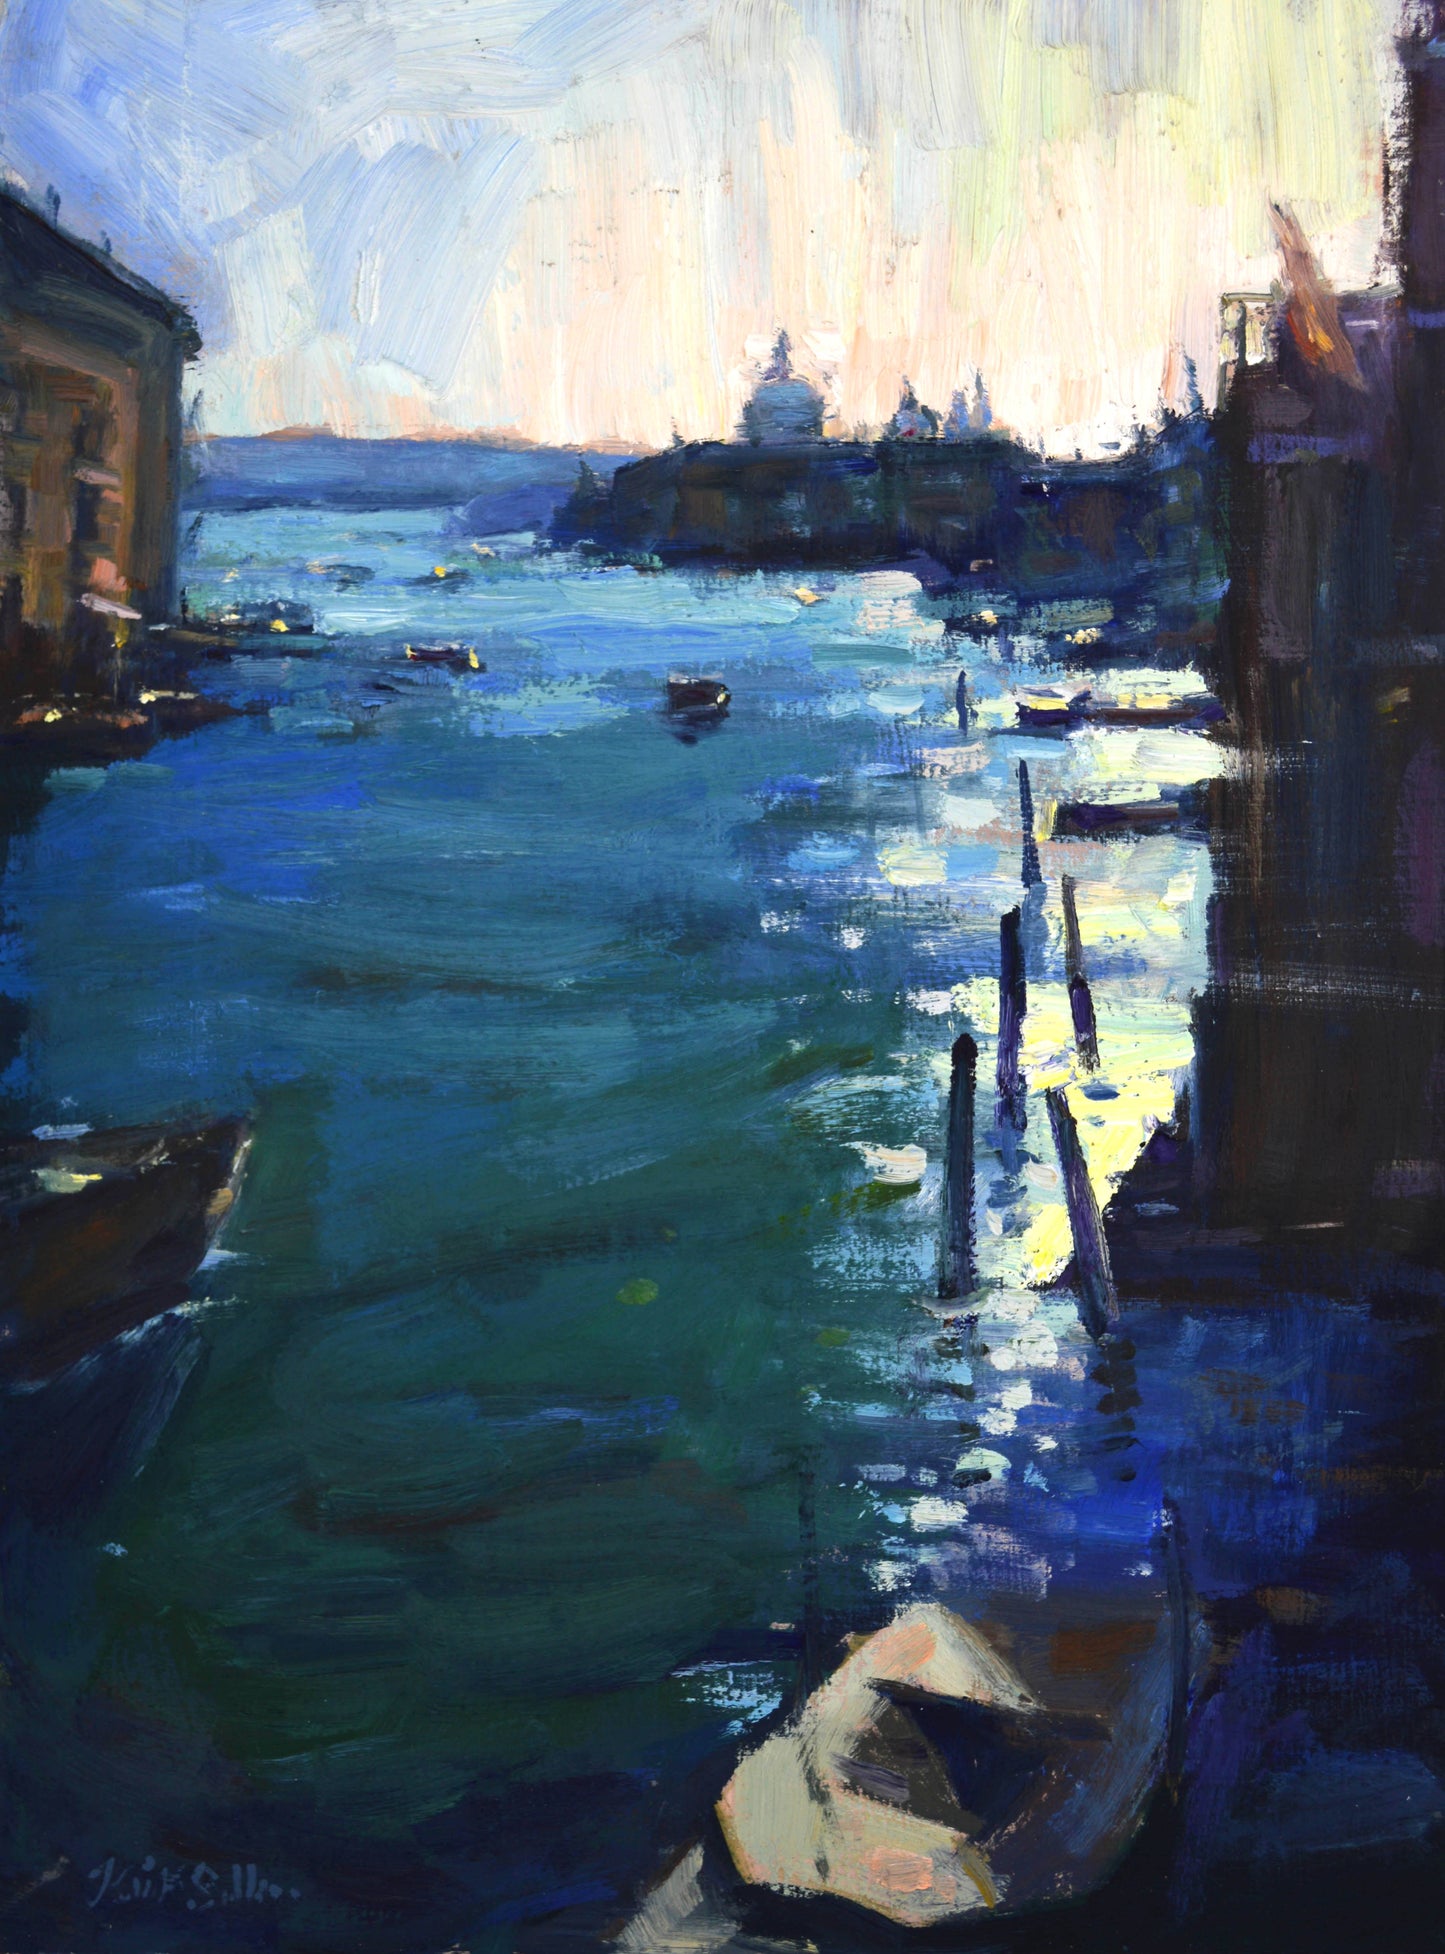 "From Rialto" 16x12 original oil painting by Artist Kristina Sellers